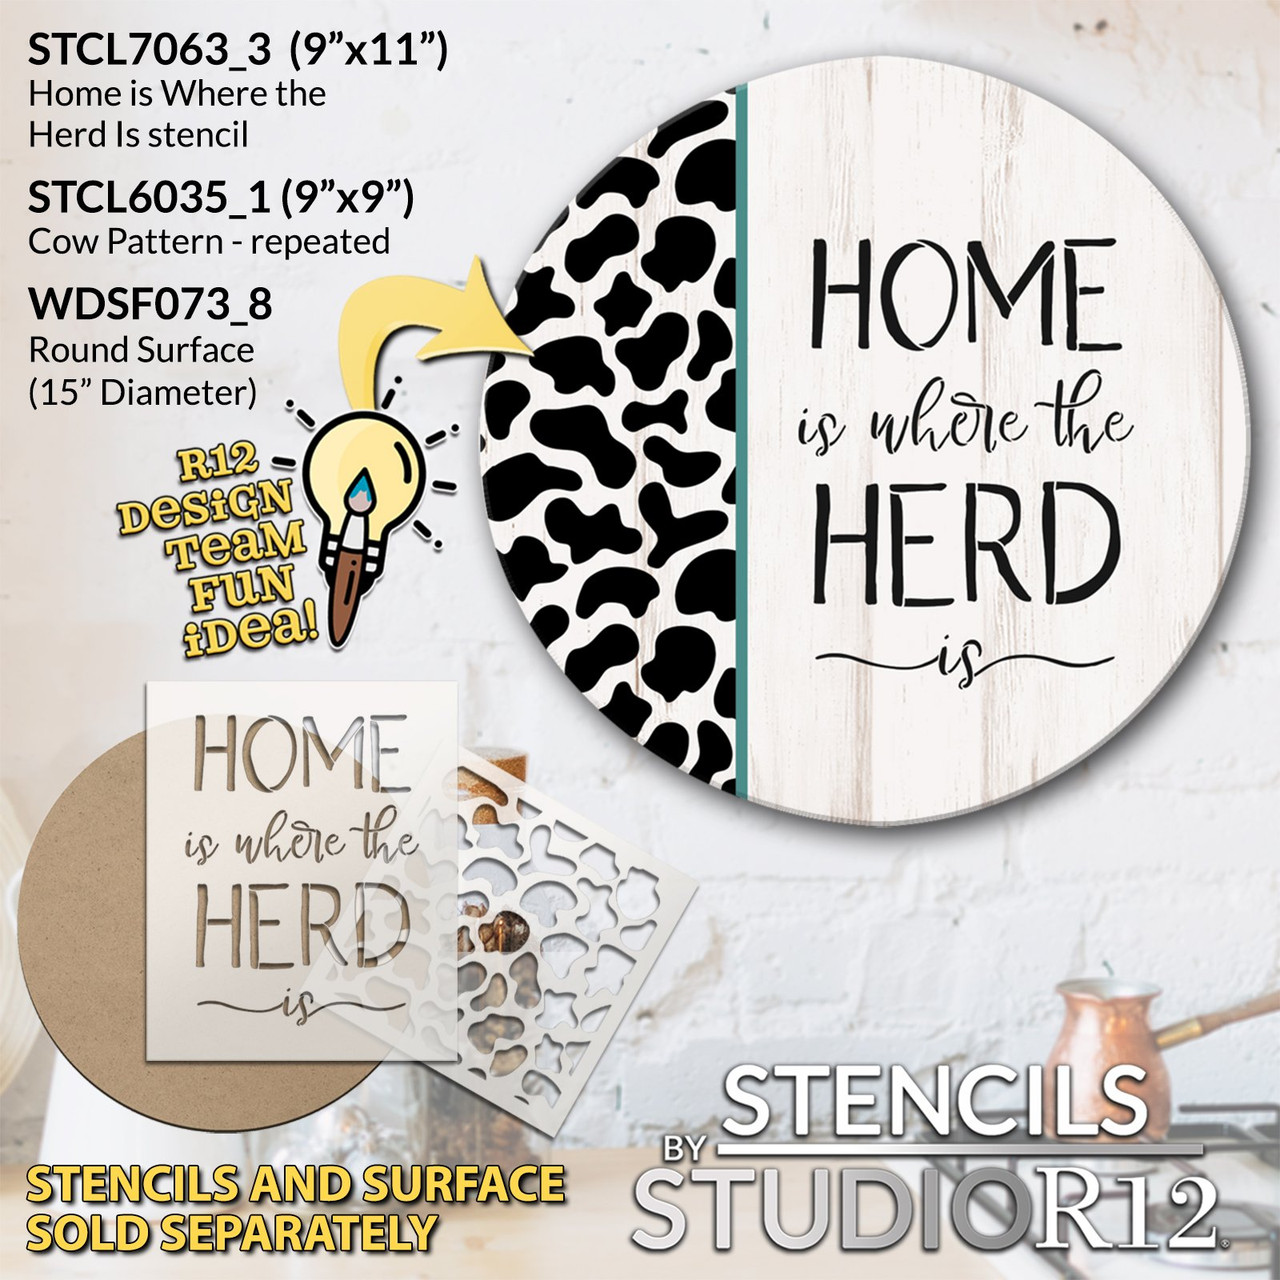 Home is Where The Herd is Script Stencil by StudioR12 - Select Size - USA Made - DIY Farmhouse Cow Welcome Front Door Decor - Craft & Paint Rustic Family Signs - STCL7063